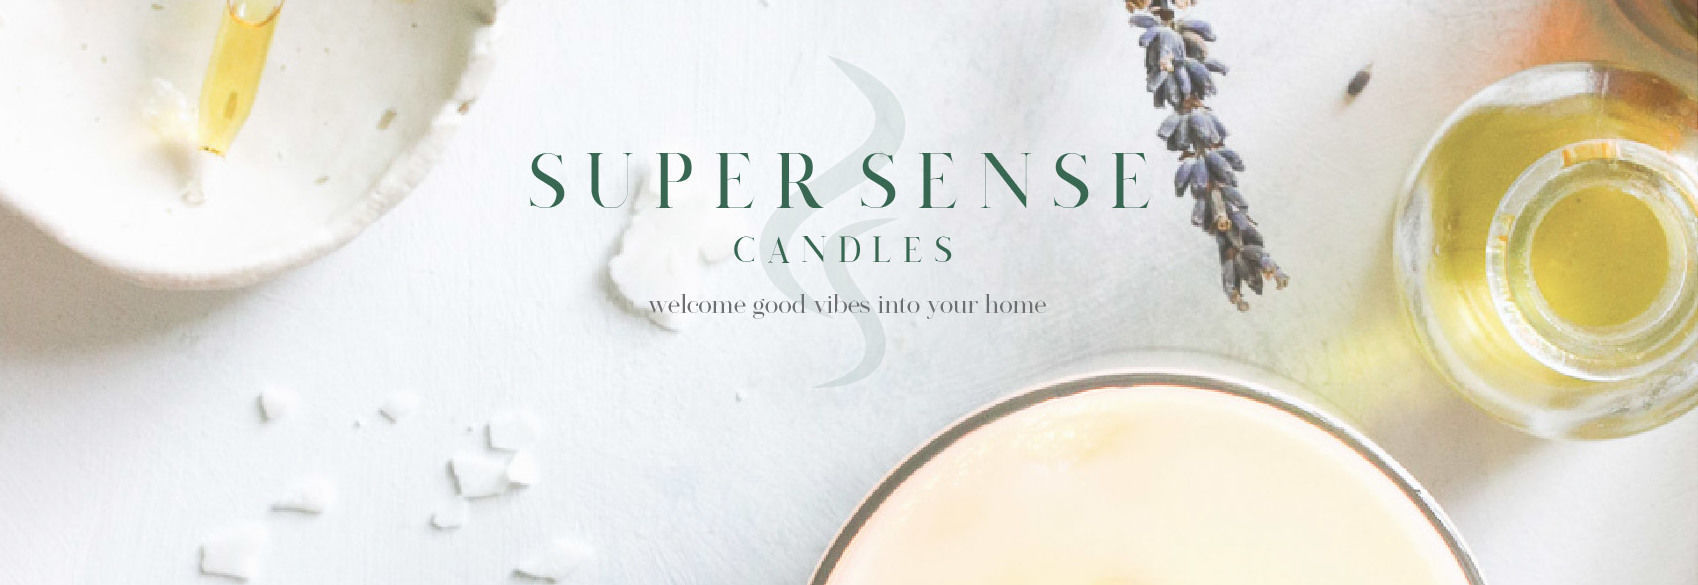 Soy wax candle